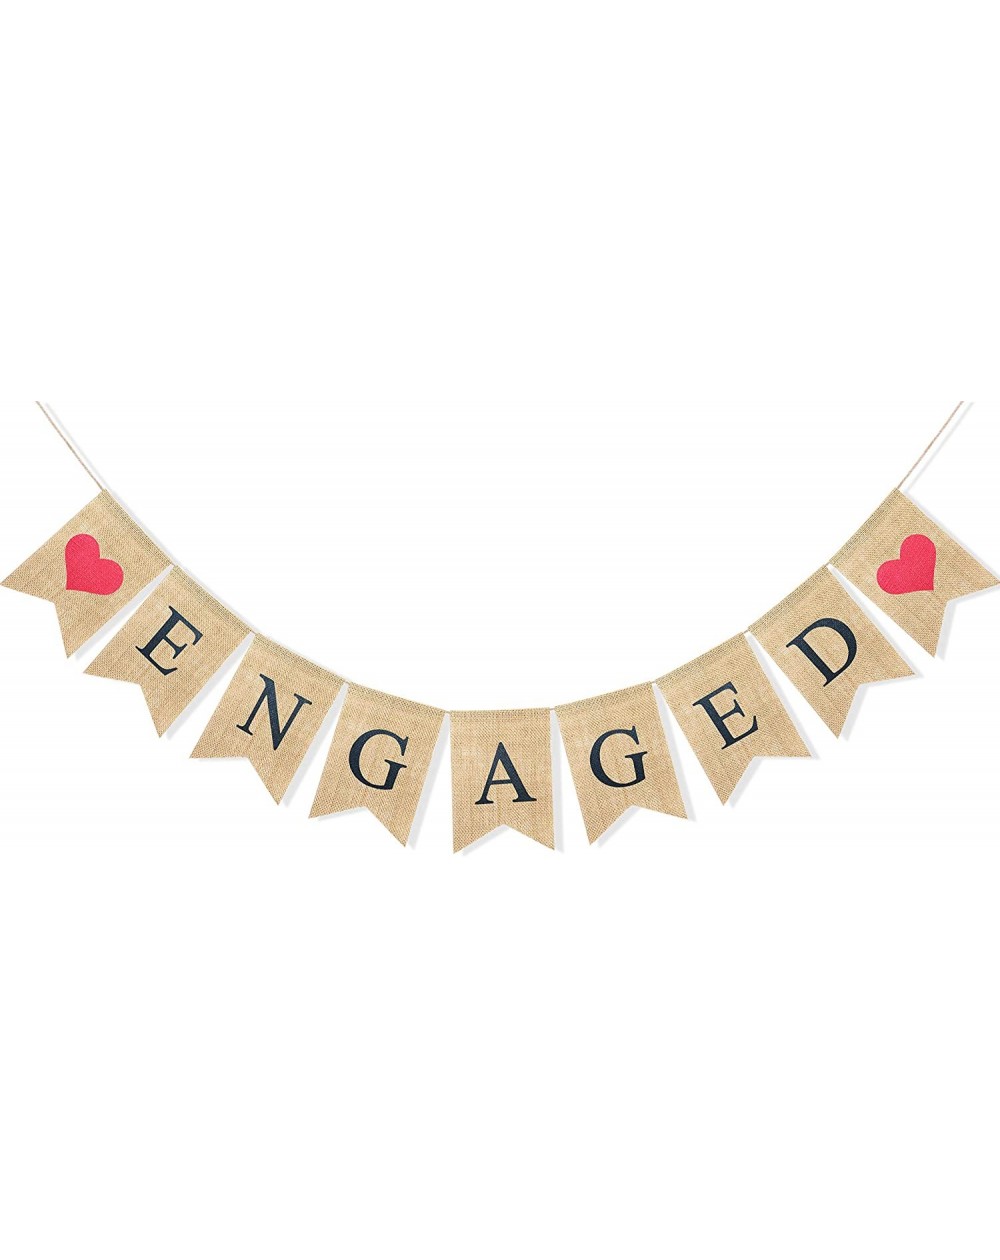 Banners & Garlands Engaged Banner Burlap Bunting Garland Bridal Shower Party Decorations- Vintage Rustic Wedding Save The Dat...